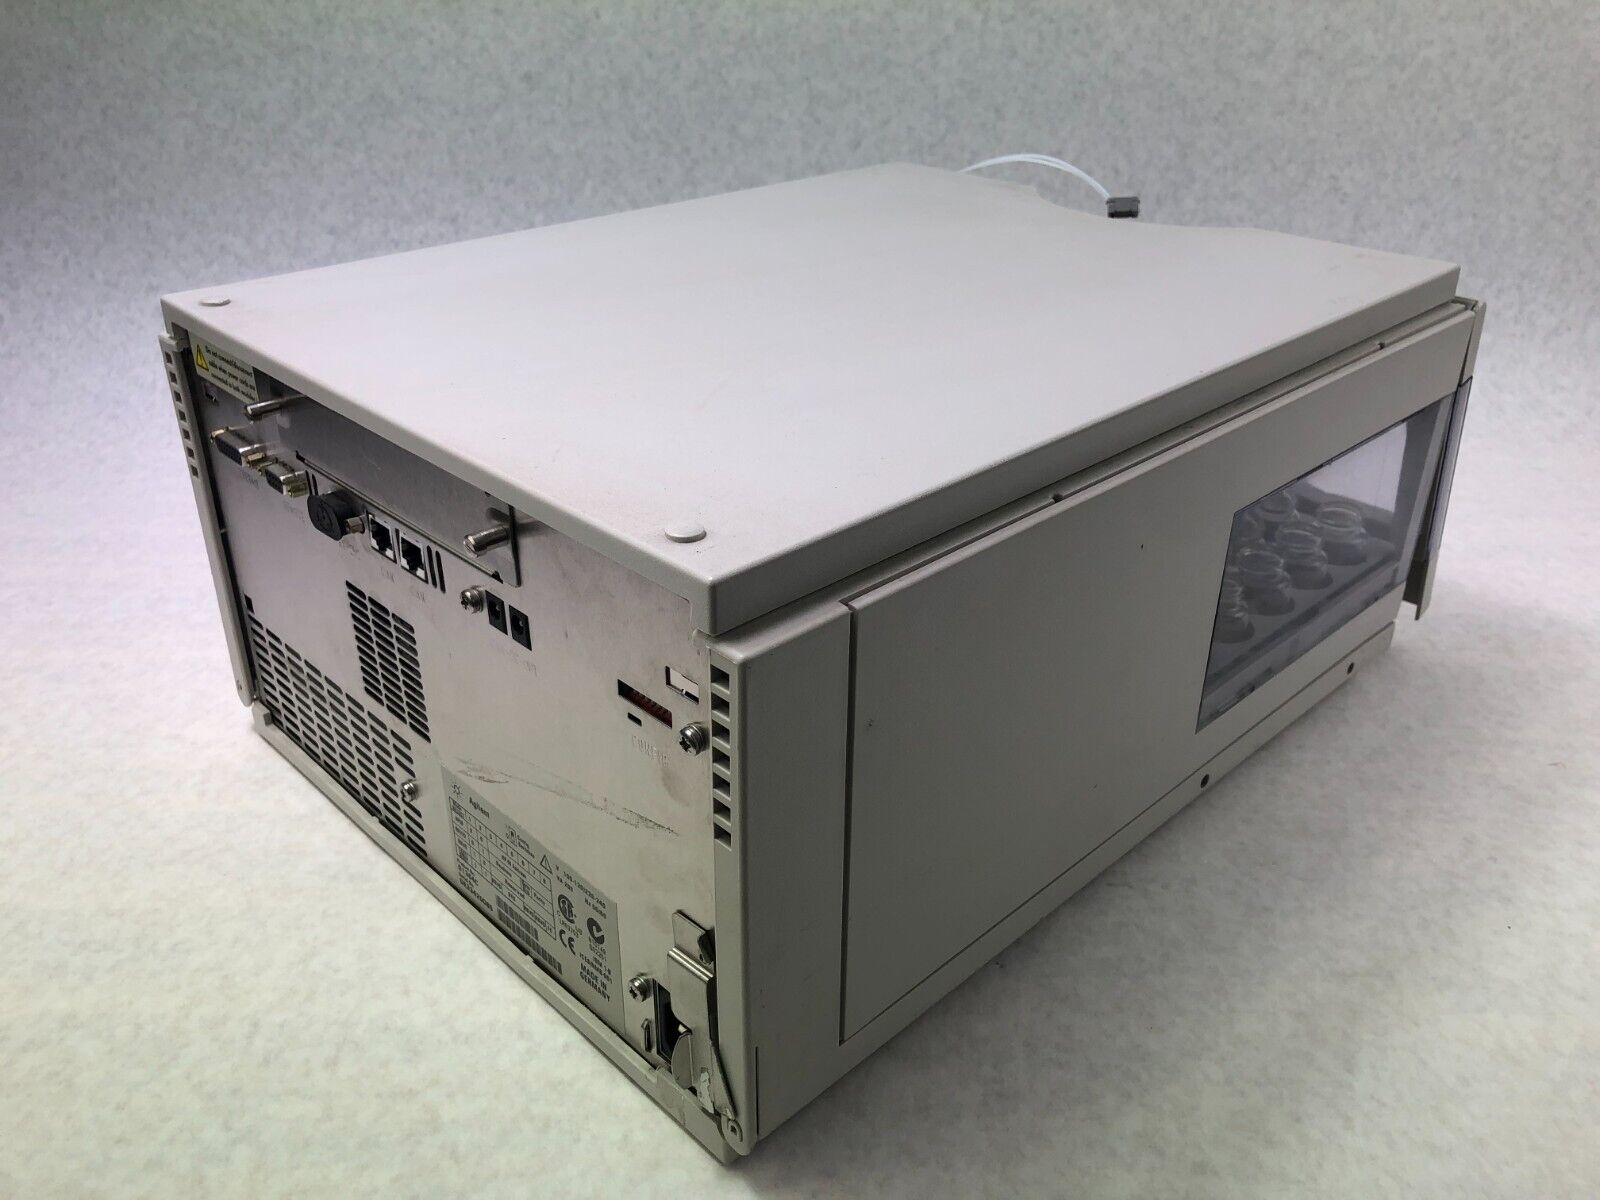 Agilent HP G1364C 1100 Series AFC Automatic Analytic Fraction Collector w/ Tray